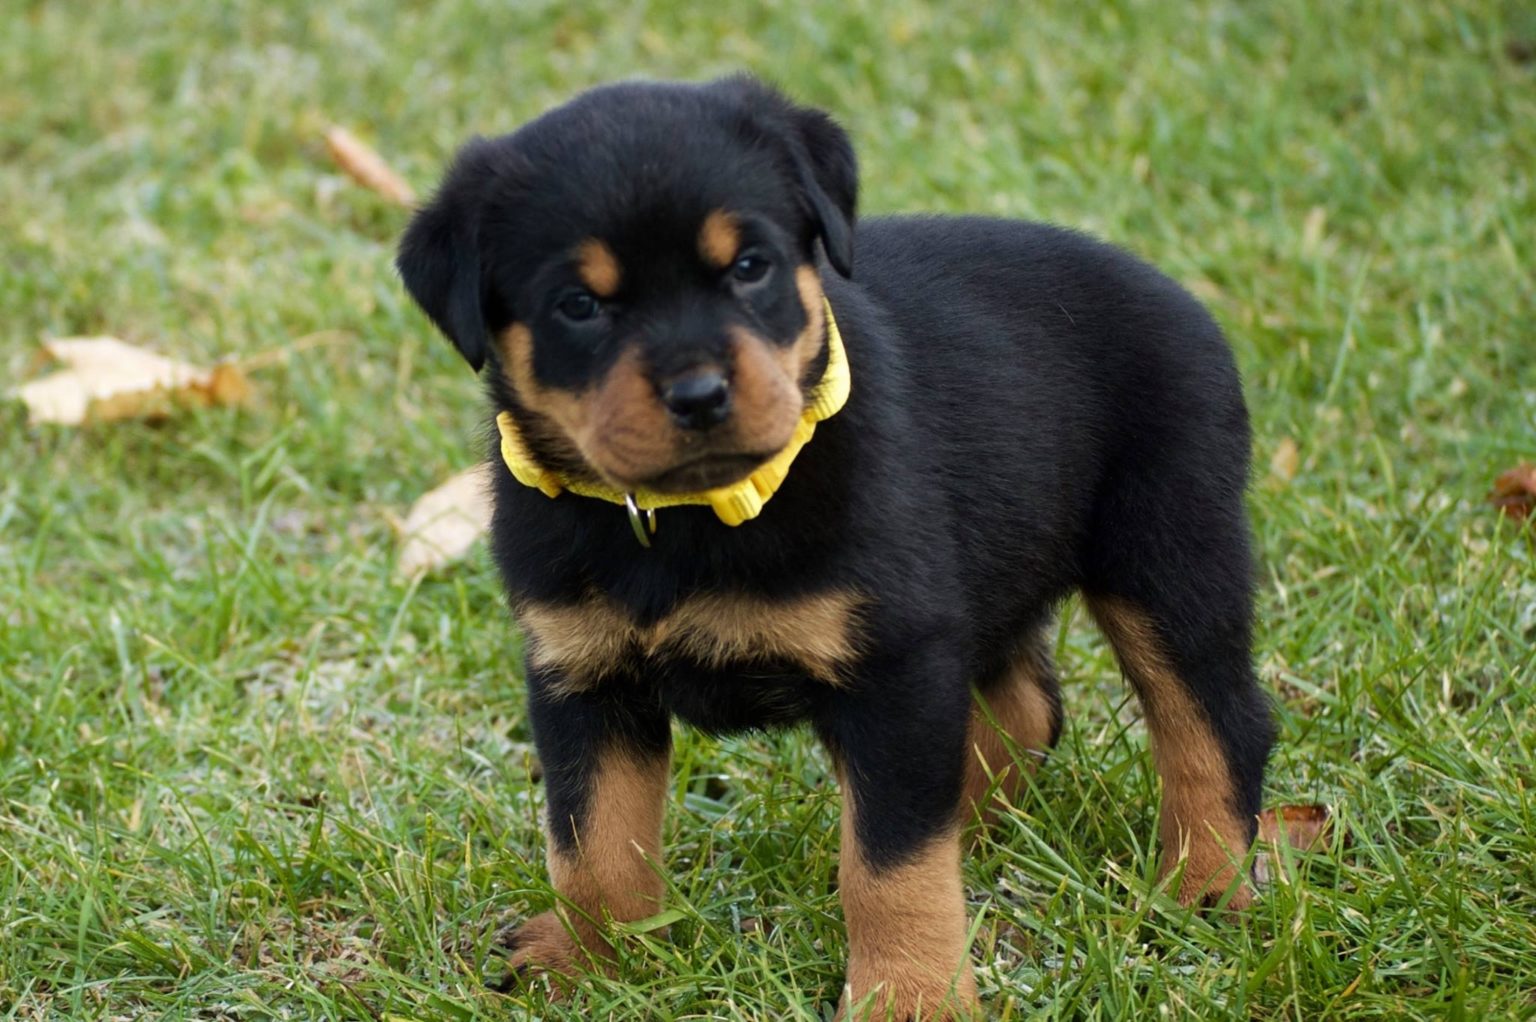 1. Rottweiler Puppies for Sale Near Me on Craigslist - wide 2